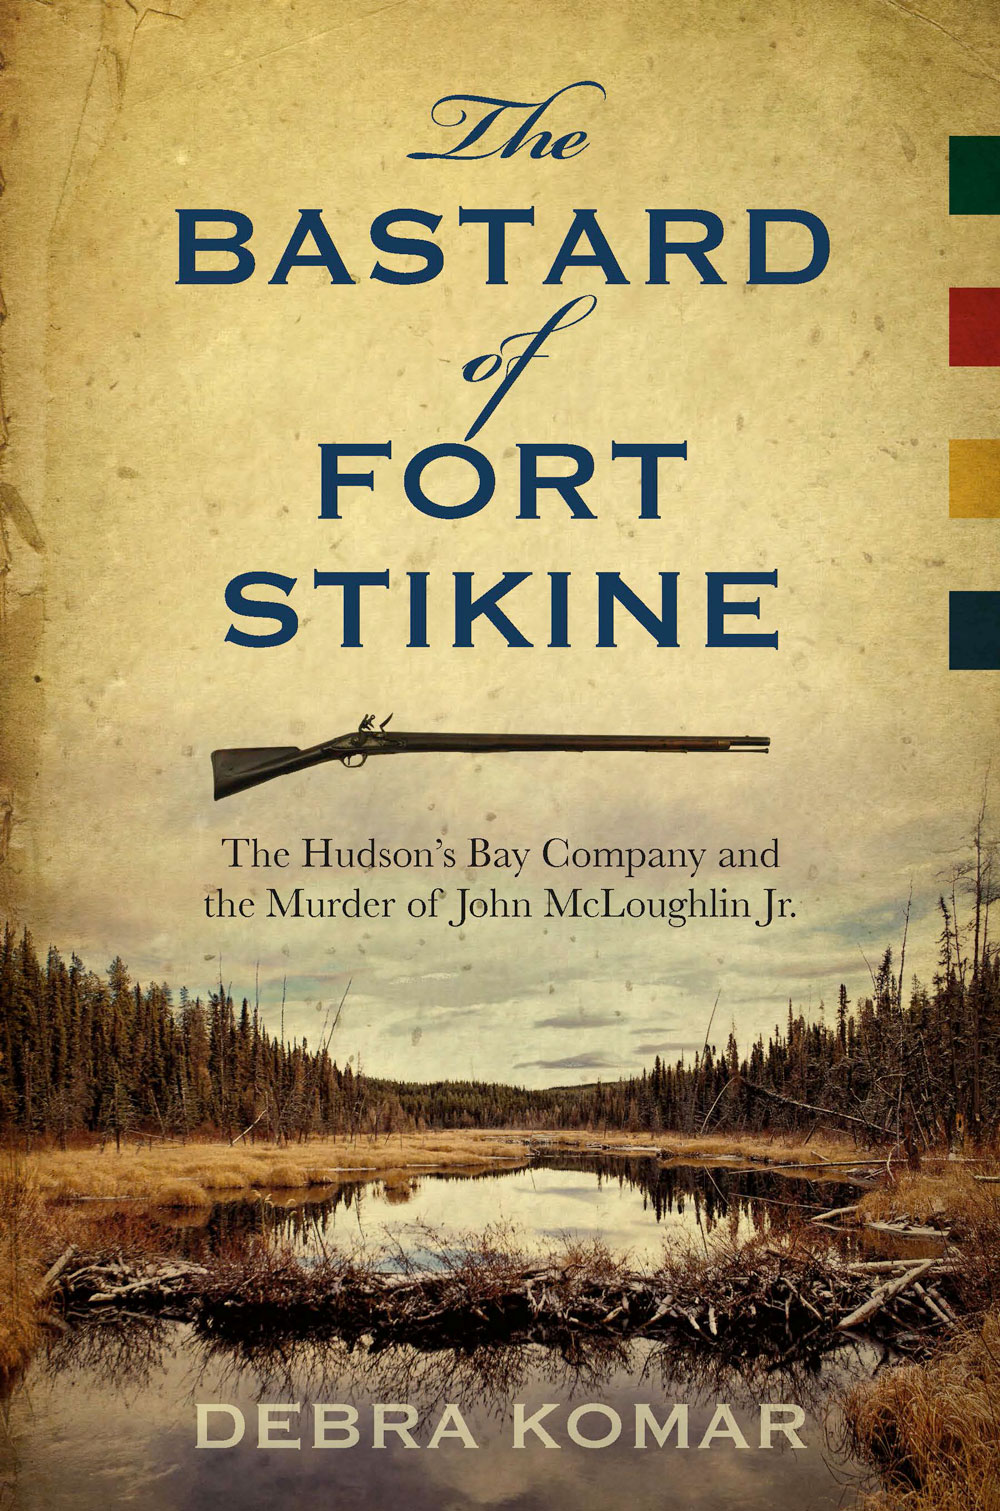 The bastard of Fort Stikine : the Hudson's Bay Company and the murder of John McLoughlin Jr.